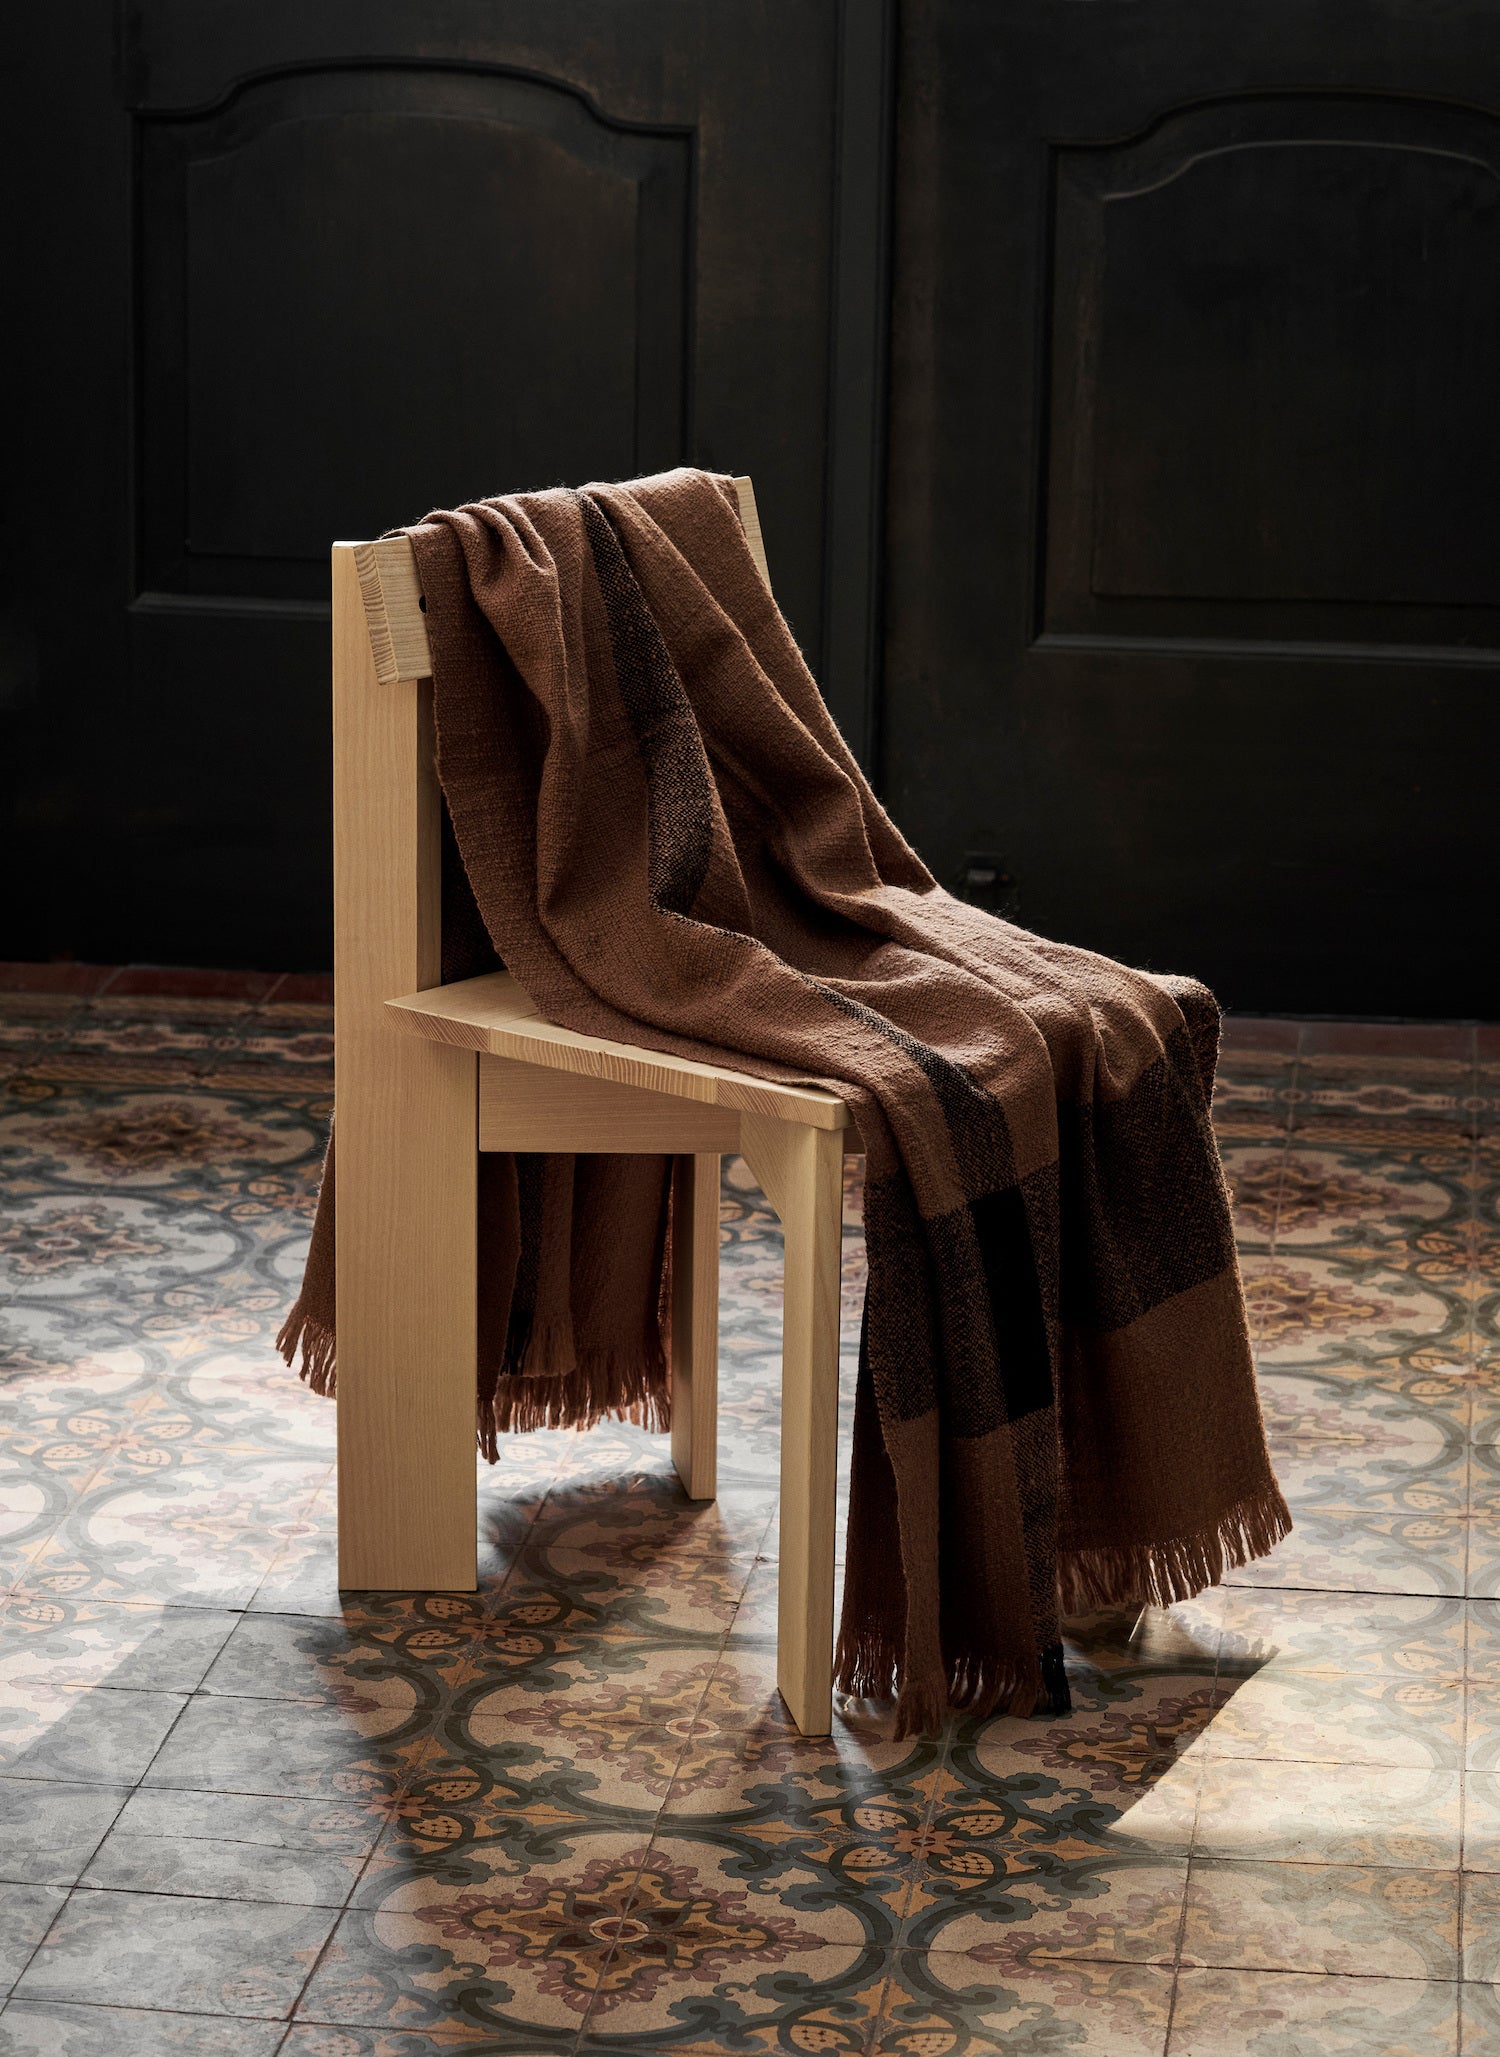 Comforting throw blanket in brown with fringe over chair.